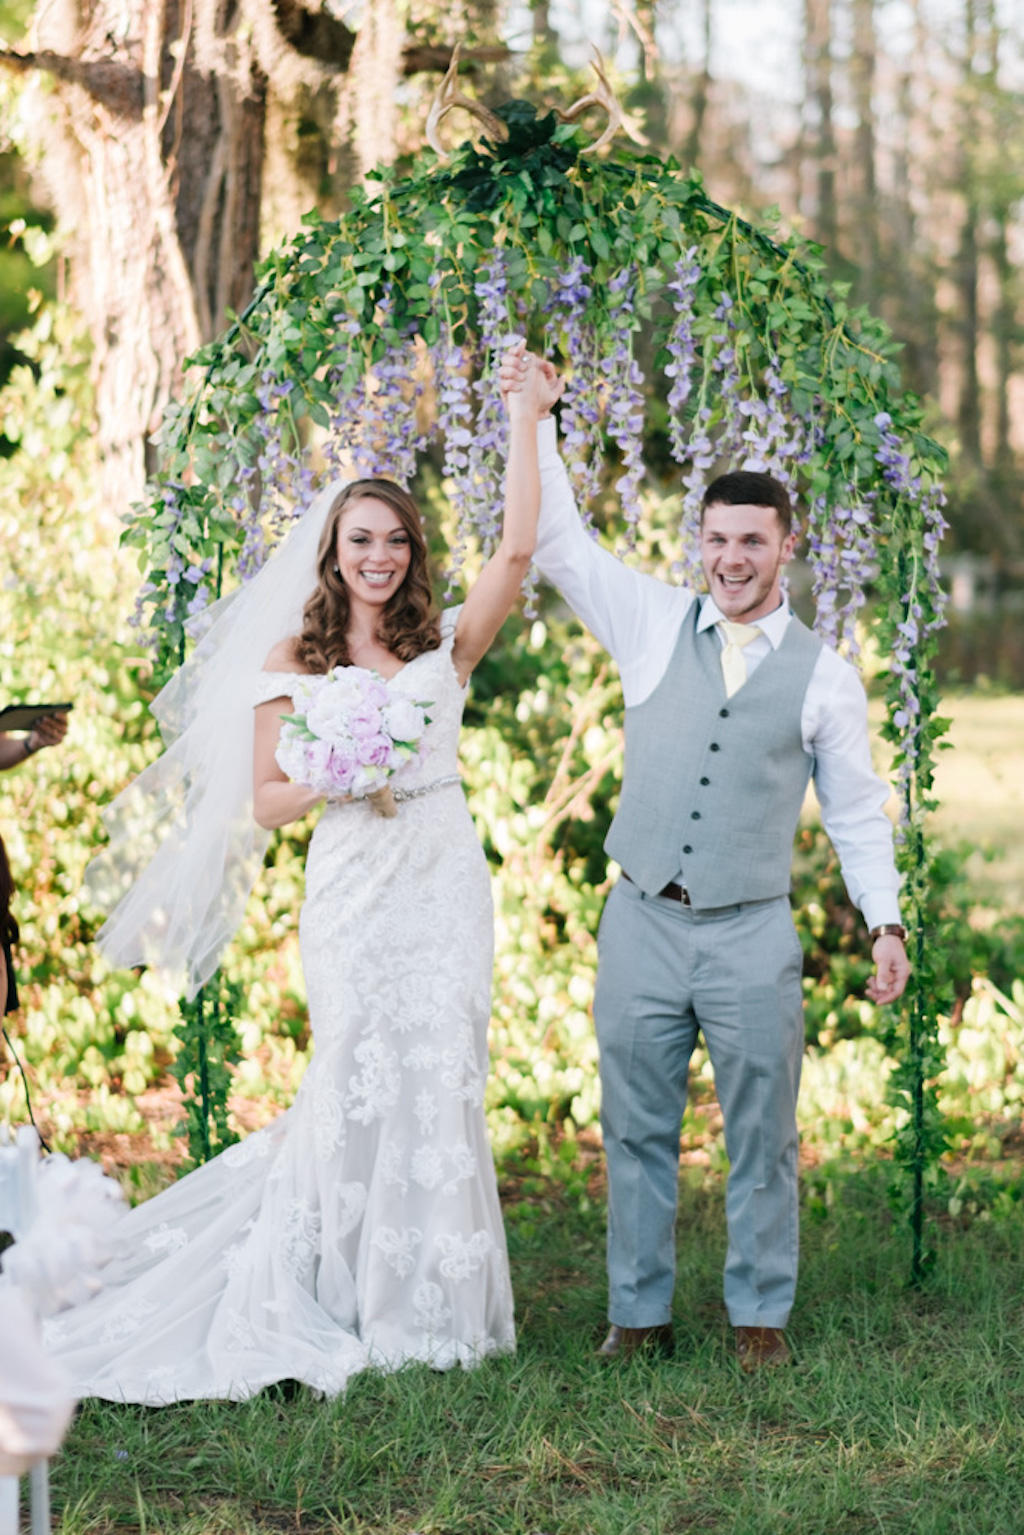 Outdoor Farm Wrought Iron Wedding Ceremony Arch with Hanging Purple Lilac Floral and Greenery | Tampa Bay Rustic Chic Private Home Estate Wedding Venue Southern Plantation Oasis